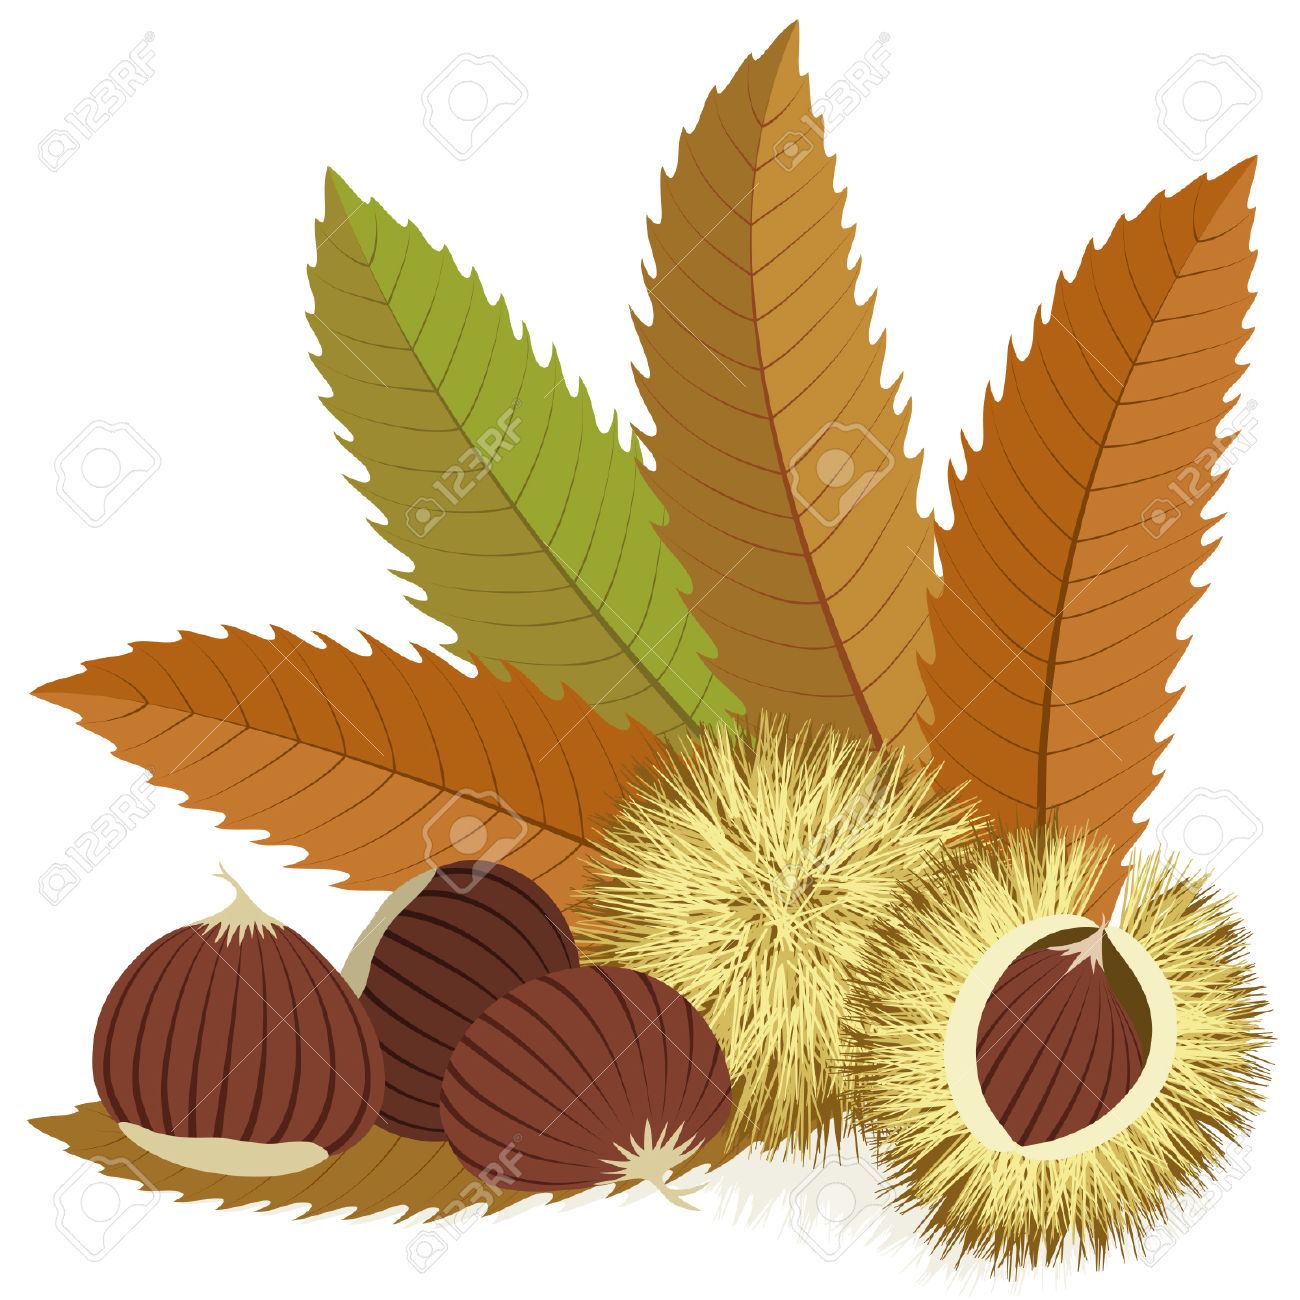 Chestnut clipart #6, Download drawings